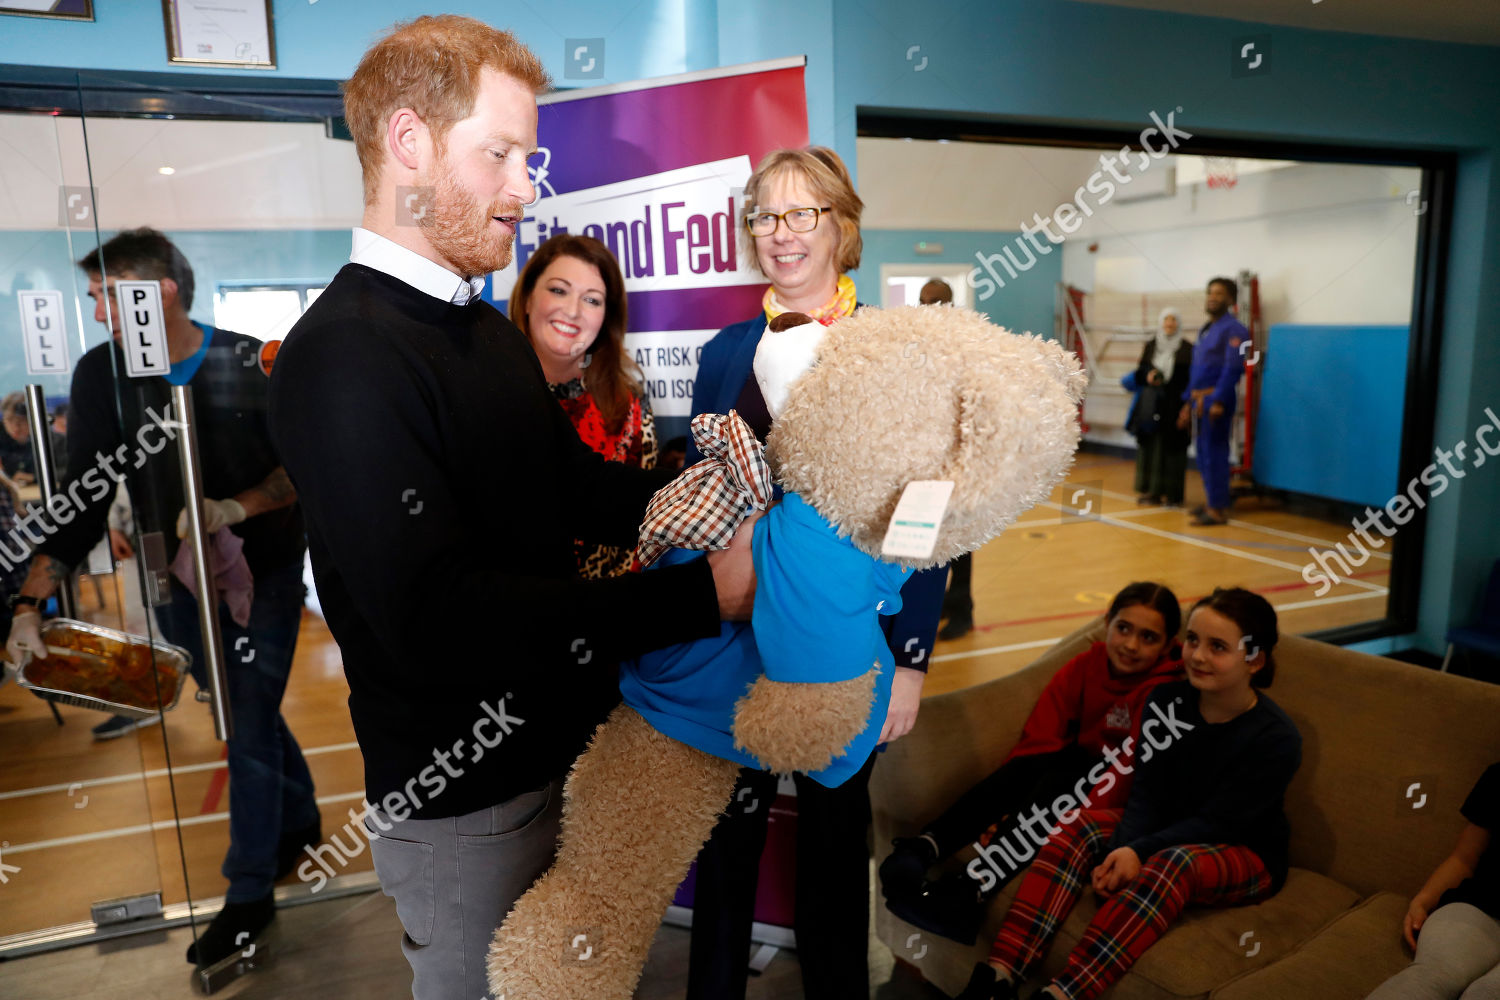 prince-harry-visit-to-fit-and-fed-half-term-initiative-streatham-london-uk-shutterstock-editorial-10110713x.jpg